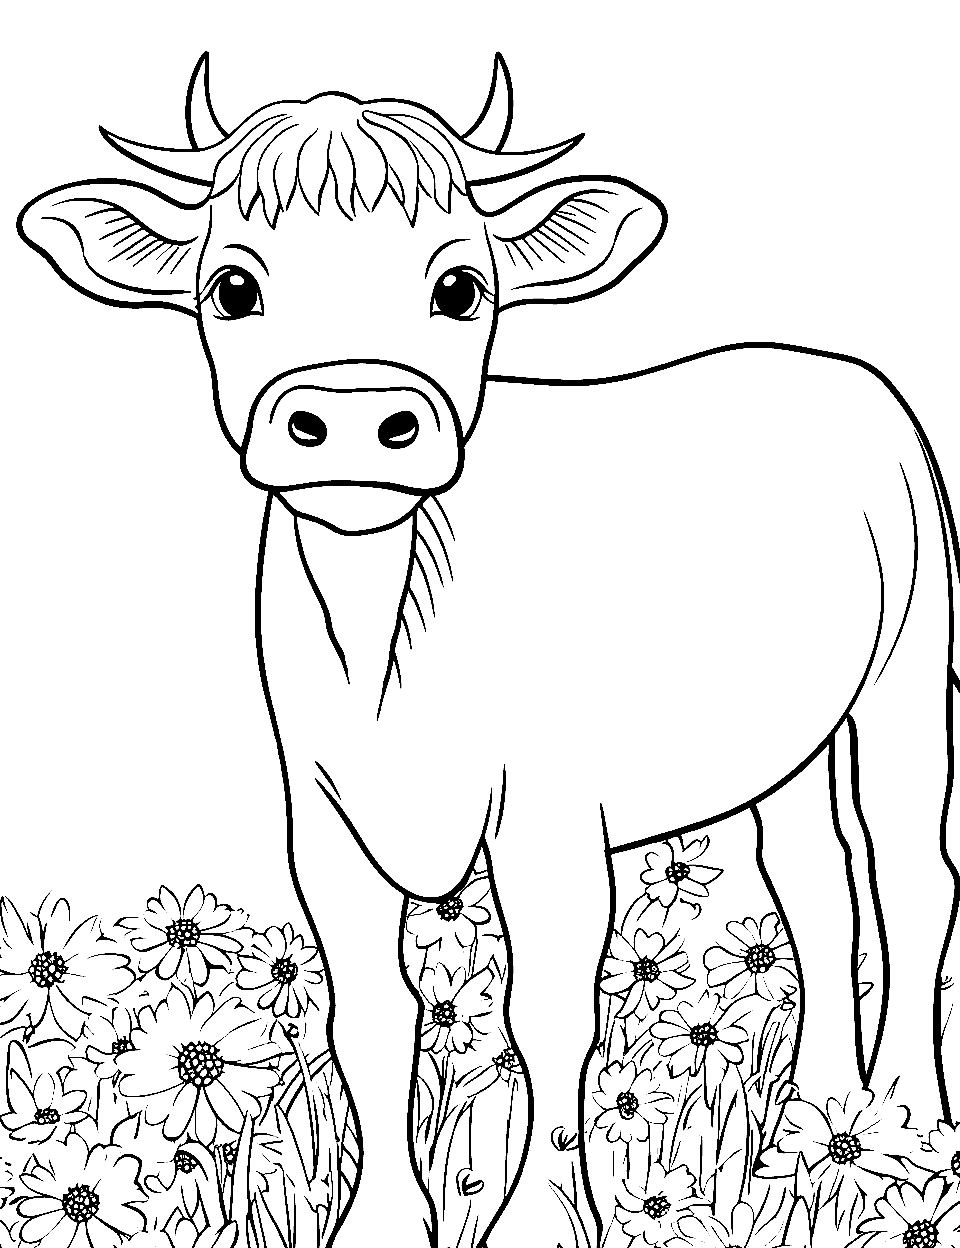 Cow Among the Daisies Coloring Page - A cow meandering through a field with daisies.